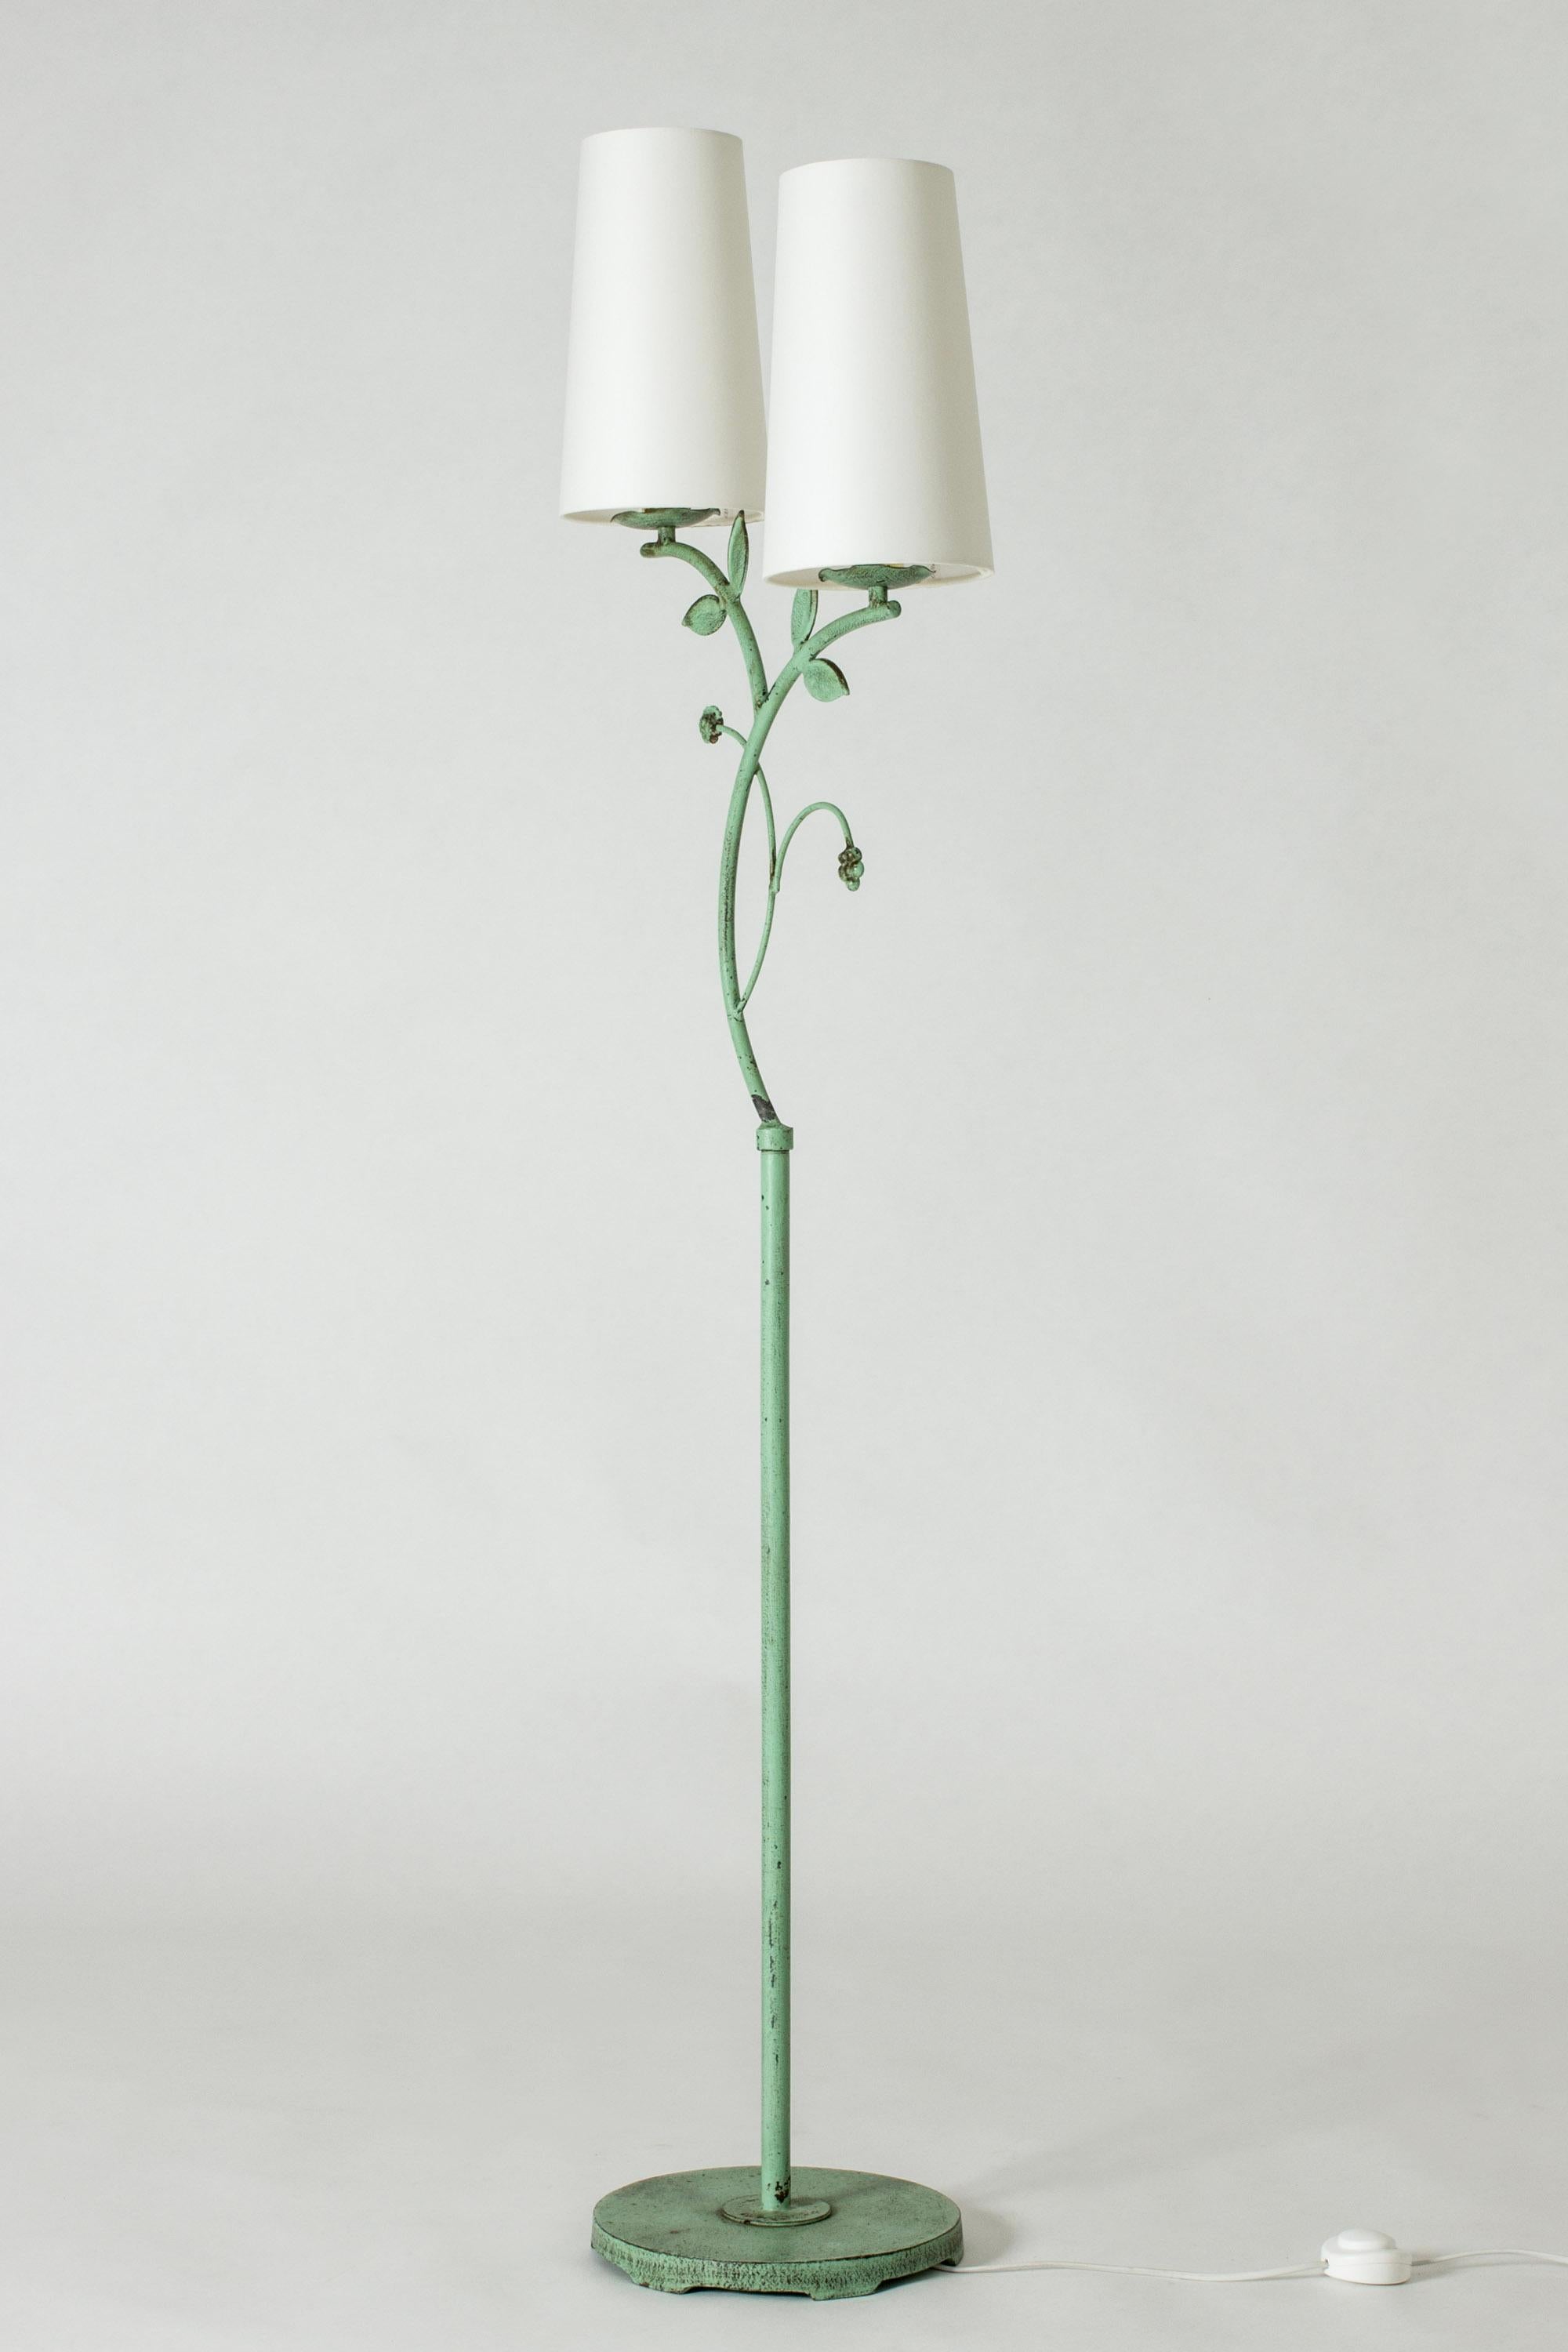 Beautiful Swedish Grace floor lamp from Bjerkås Armatur, made from oxidized green lacquered metal. Decorated with leaves and flowers.